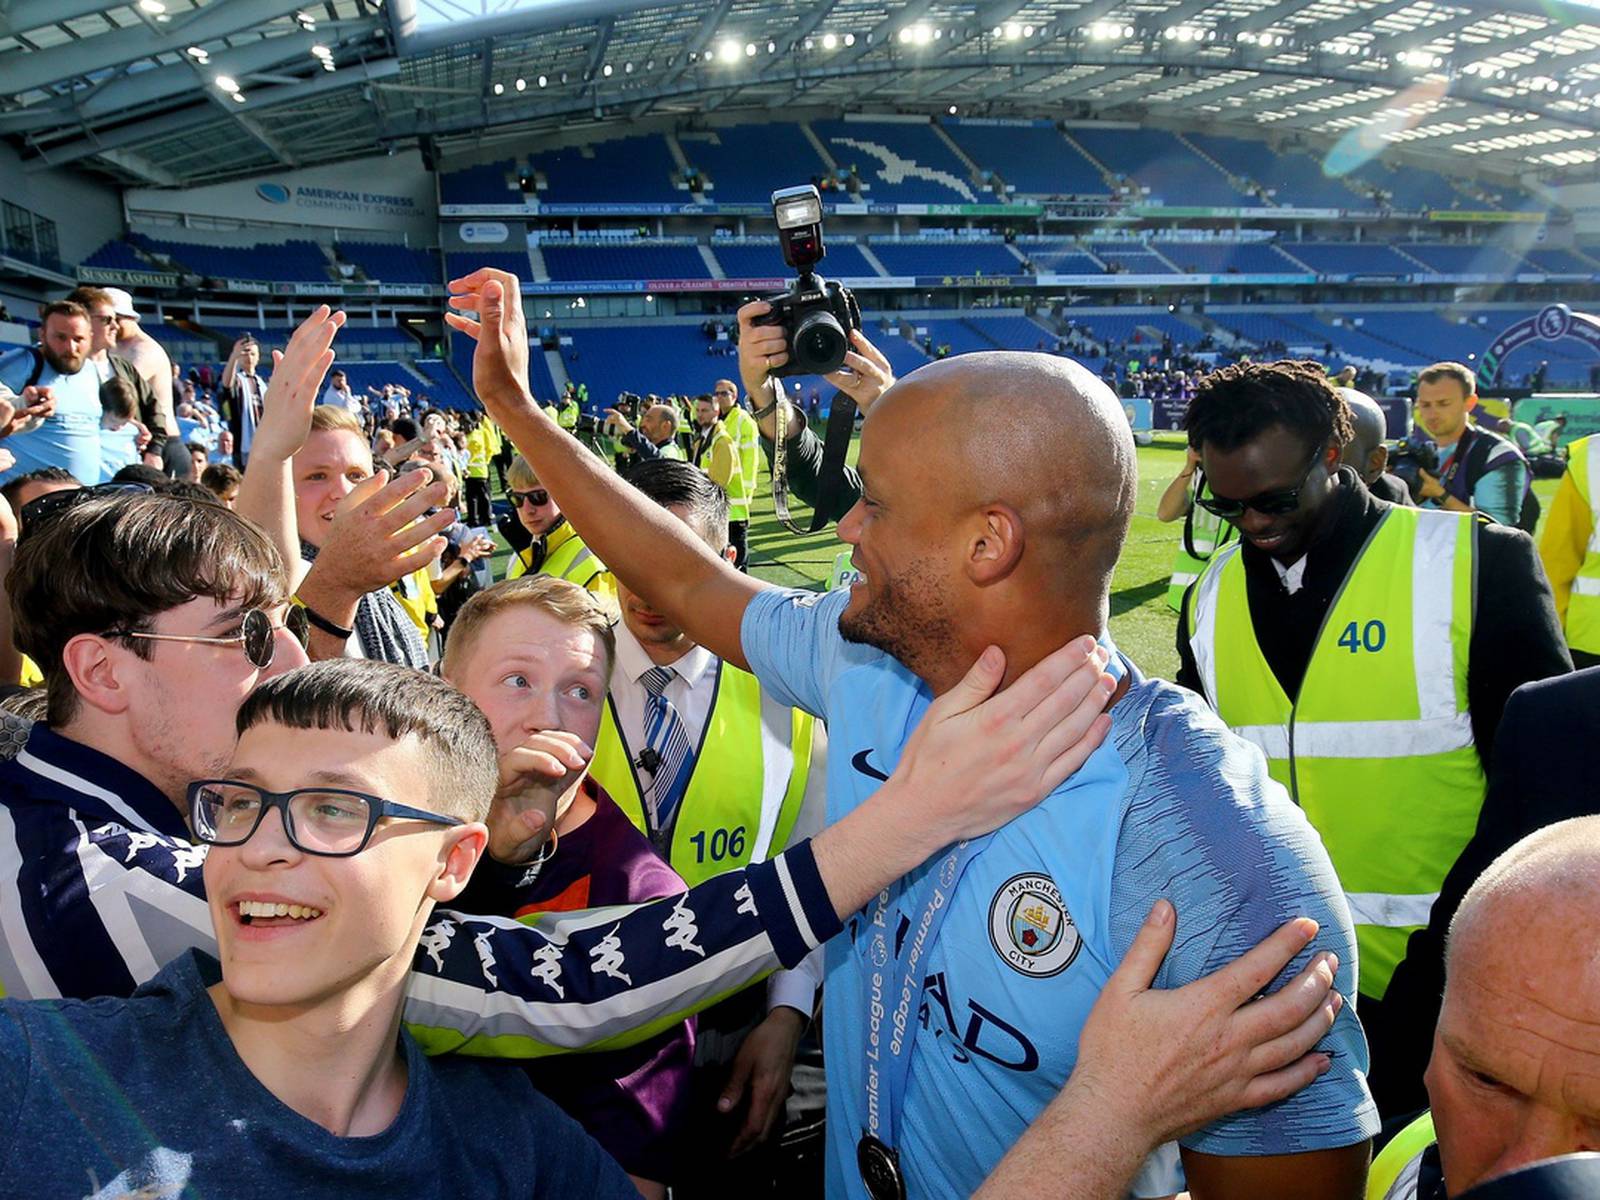 Vincent Kompany: We have a talent group, I wouldn't say no to more!, Video, Watch TV Show